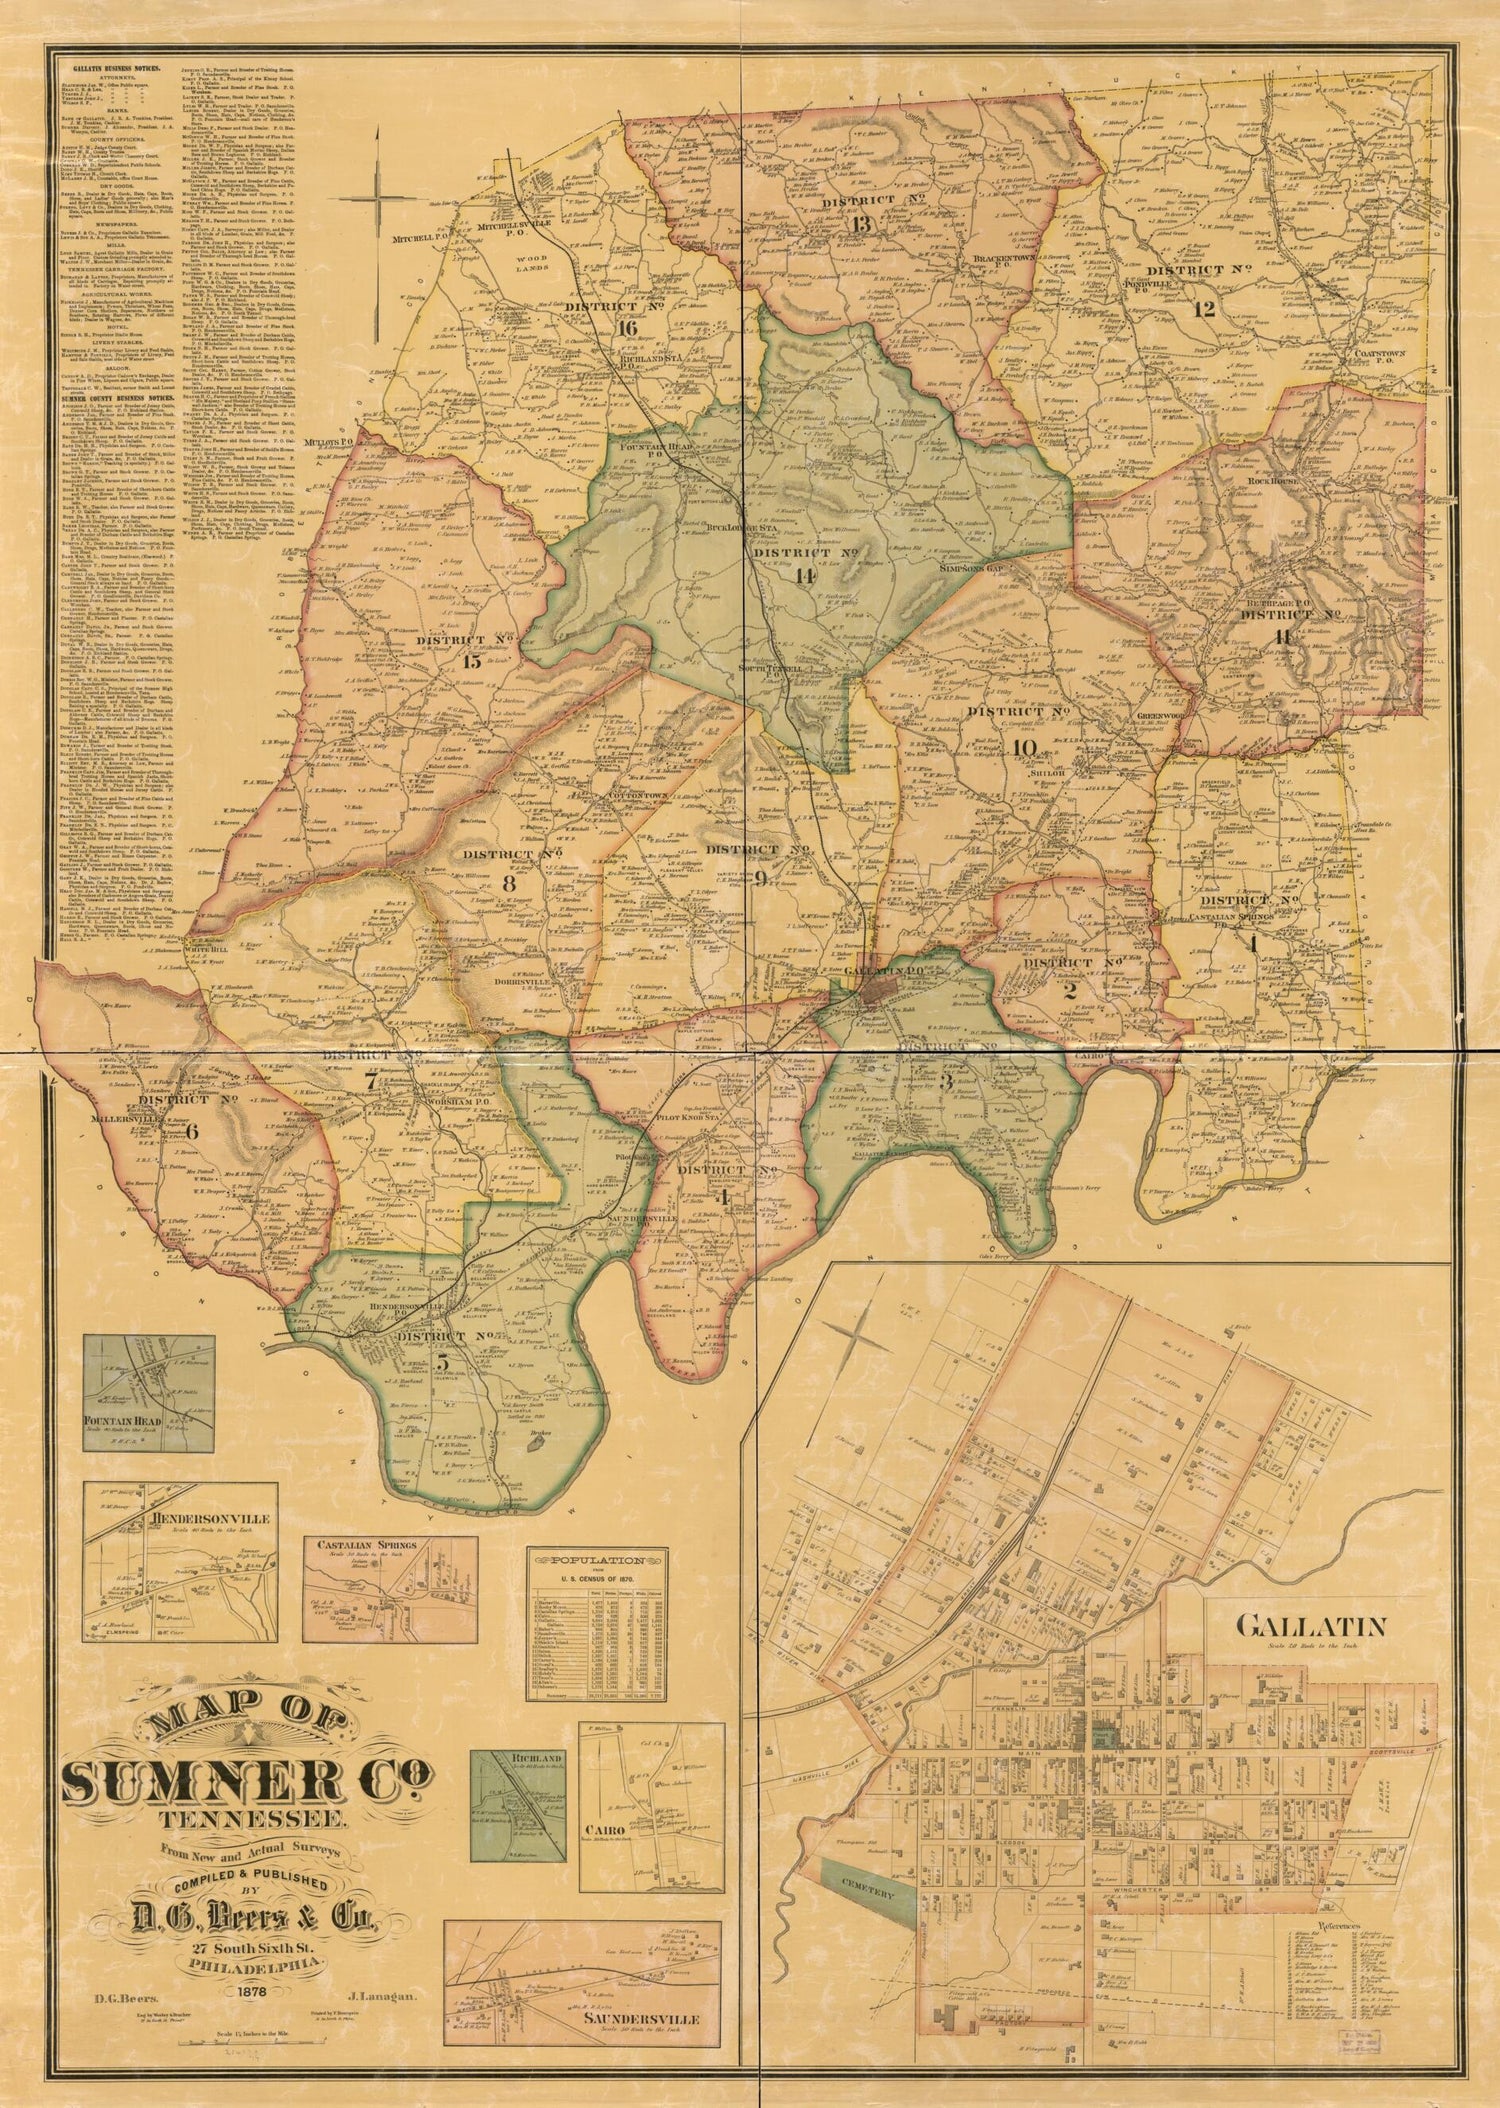 This old map of Map of Sumner Co., Tennessee : from New and Actual Surveys (Map of Sumner County, Tennessee) from 1878 was created by D. G. (Daniel G.) Beers, F. (Frederick) Bourquin,  D.G. Beers &amp; Co, J. Lanagan,  Worley &amp; Bracher in 1878